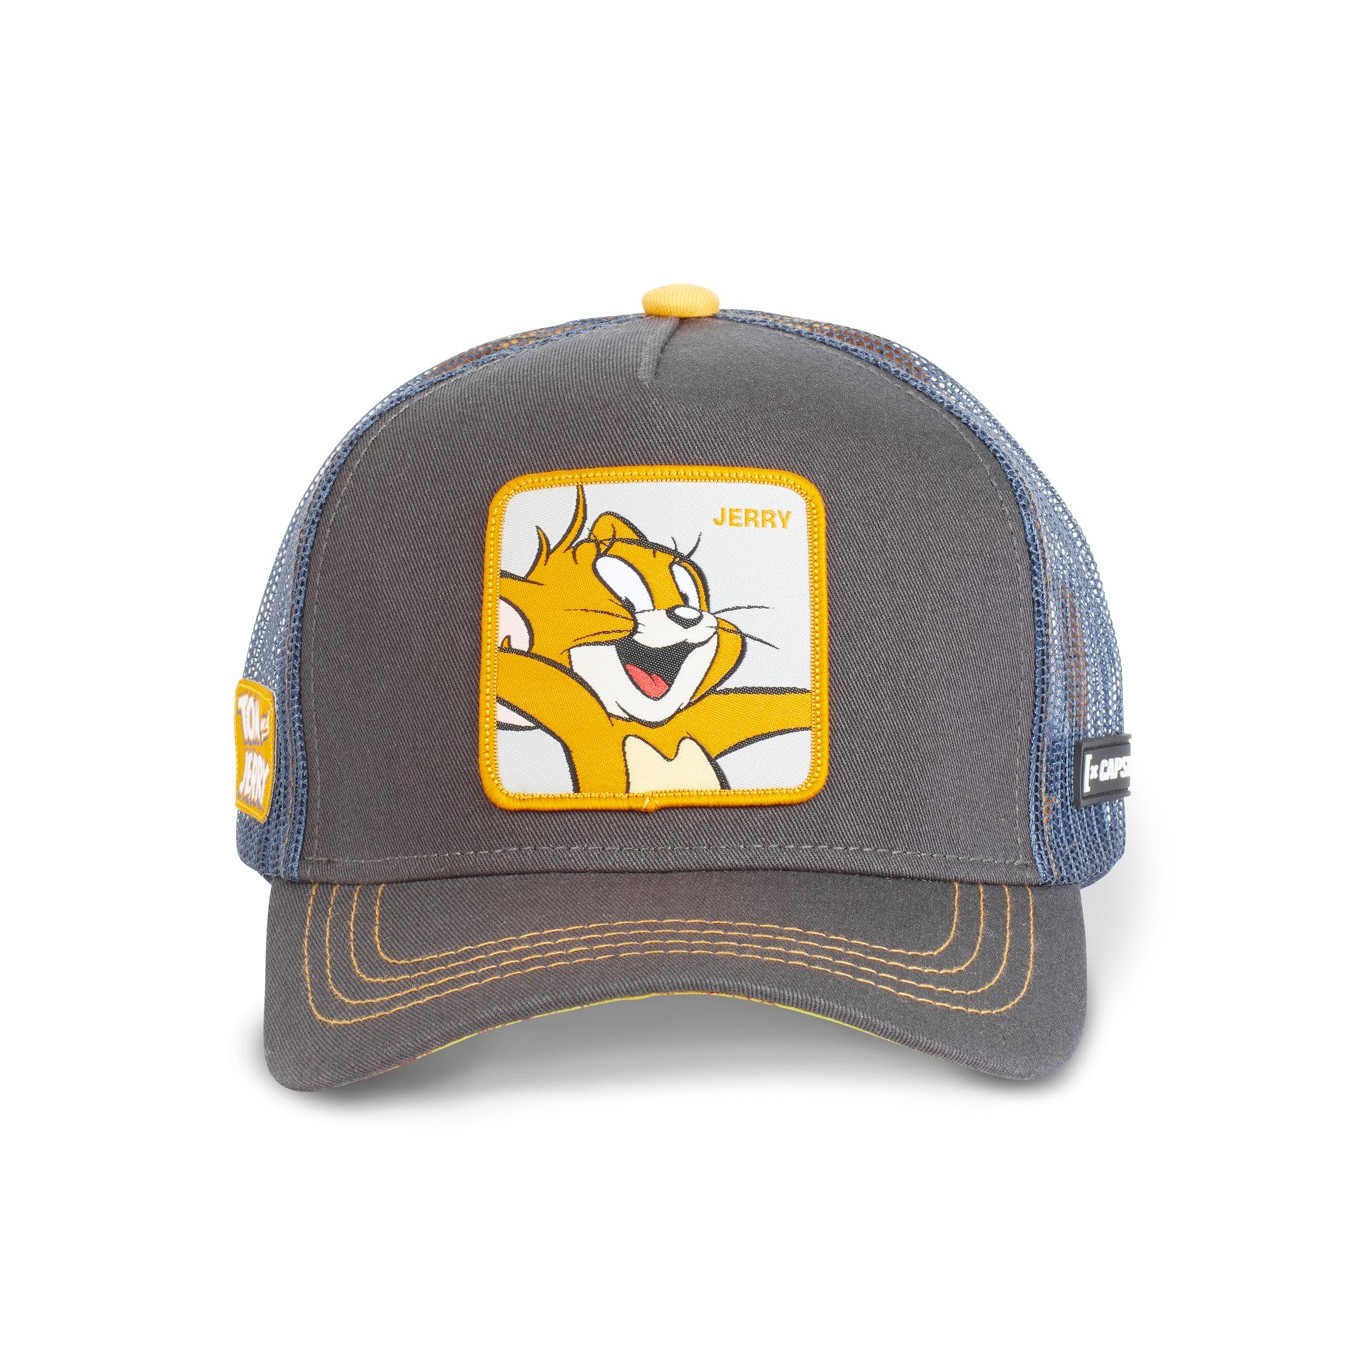 Casquette Capslab adulte Tom and Jerry Happy Jerry Capslab - 2